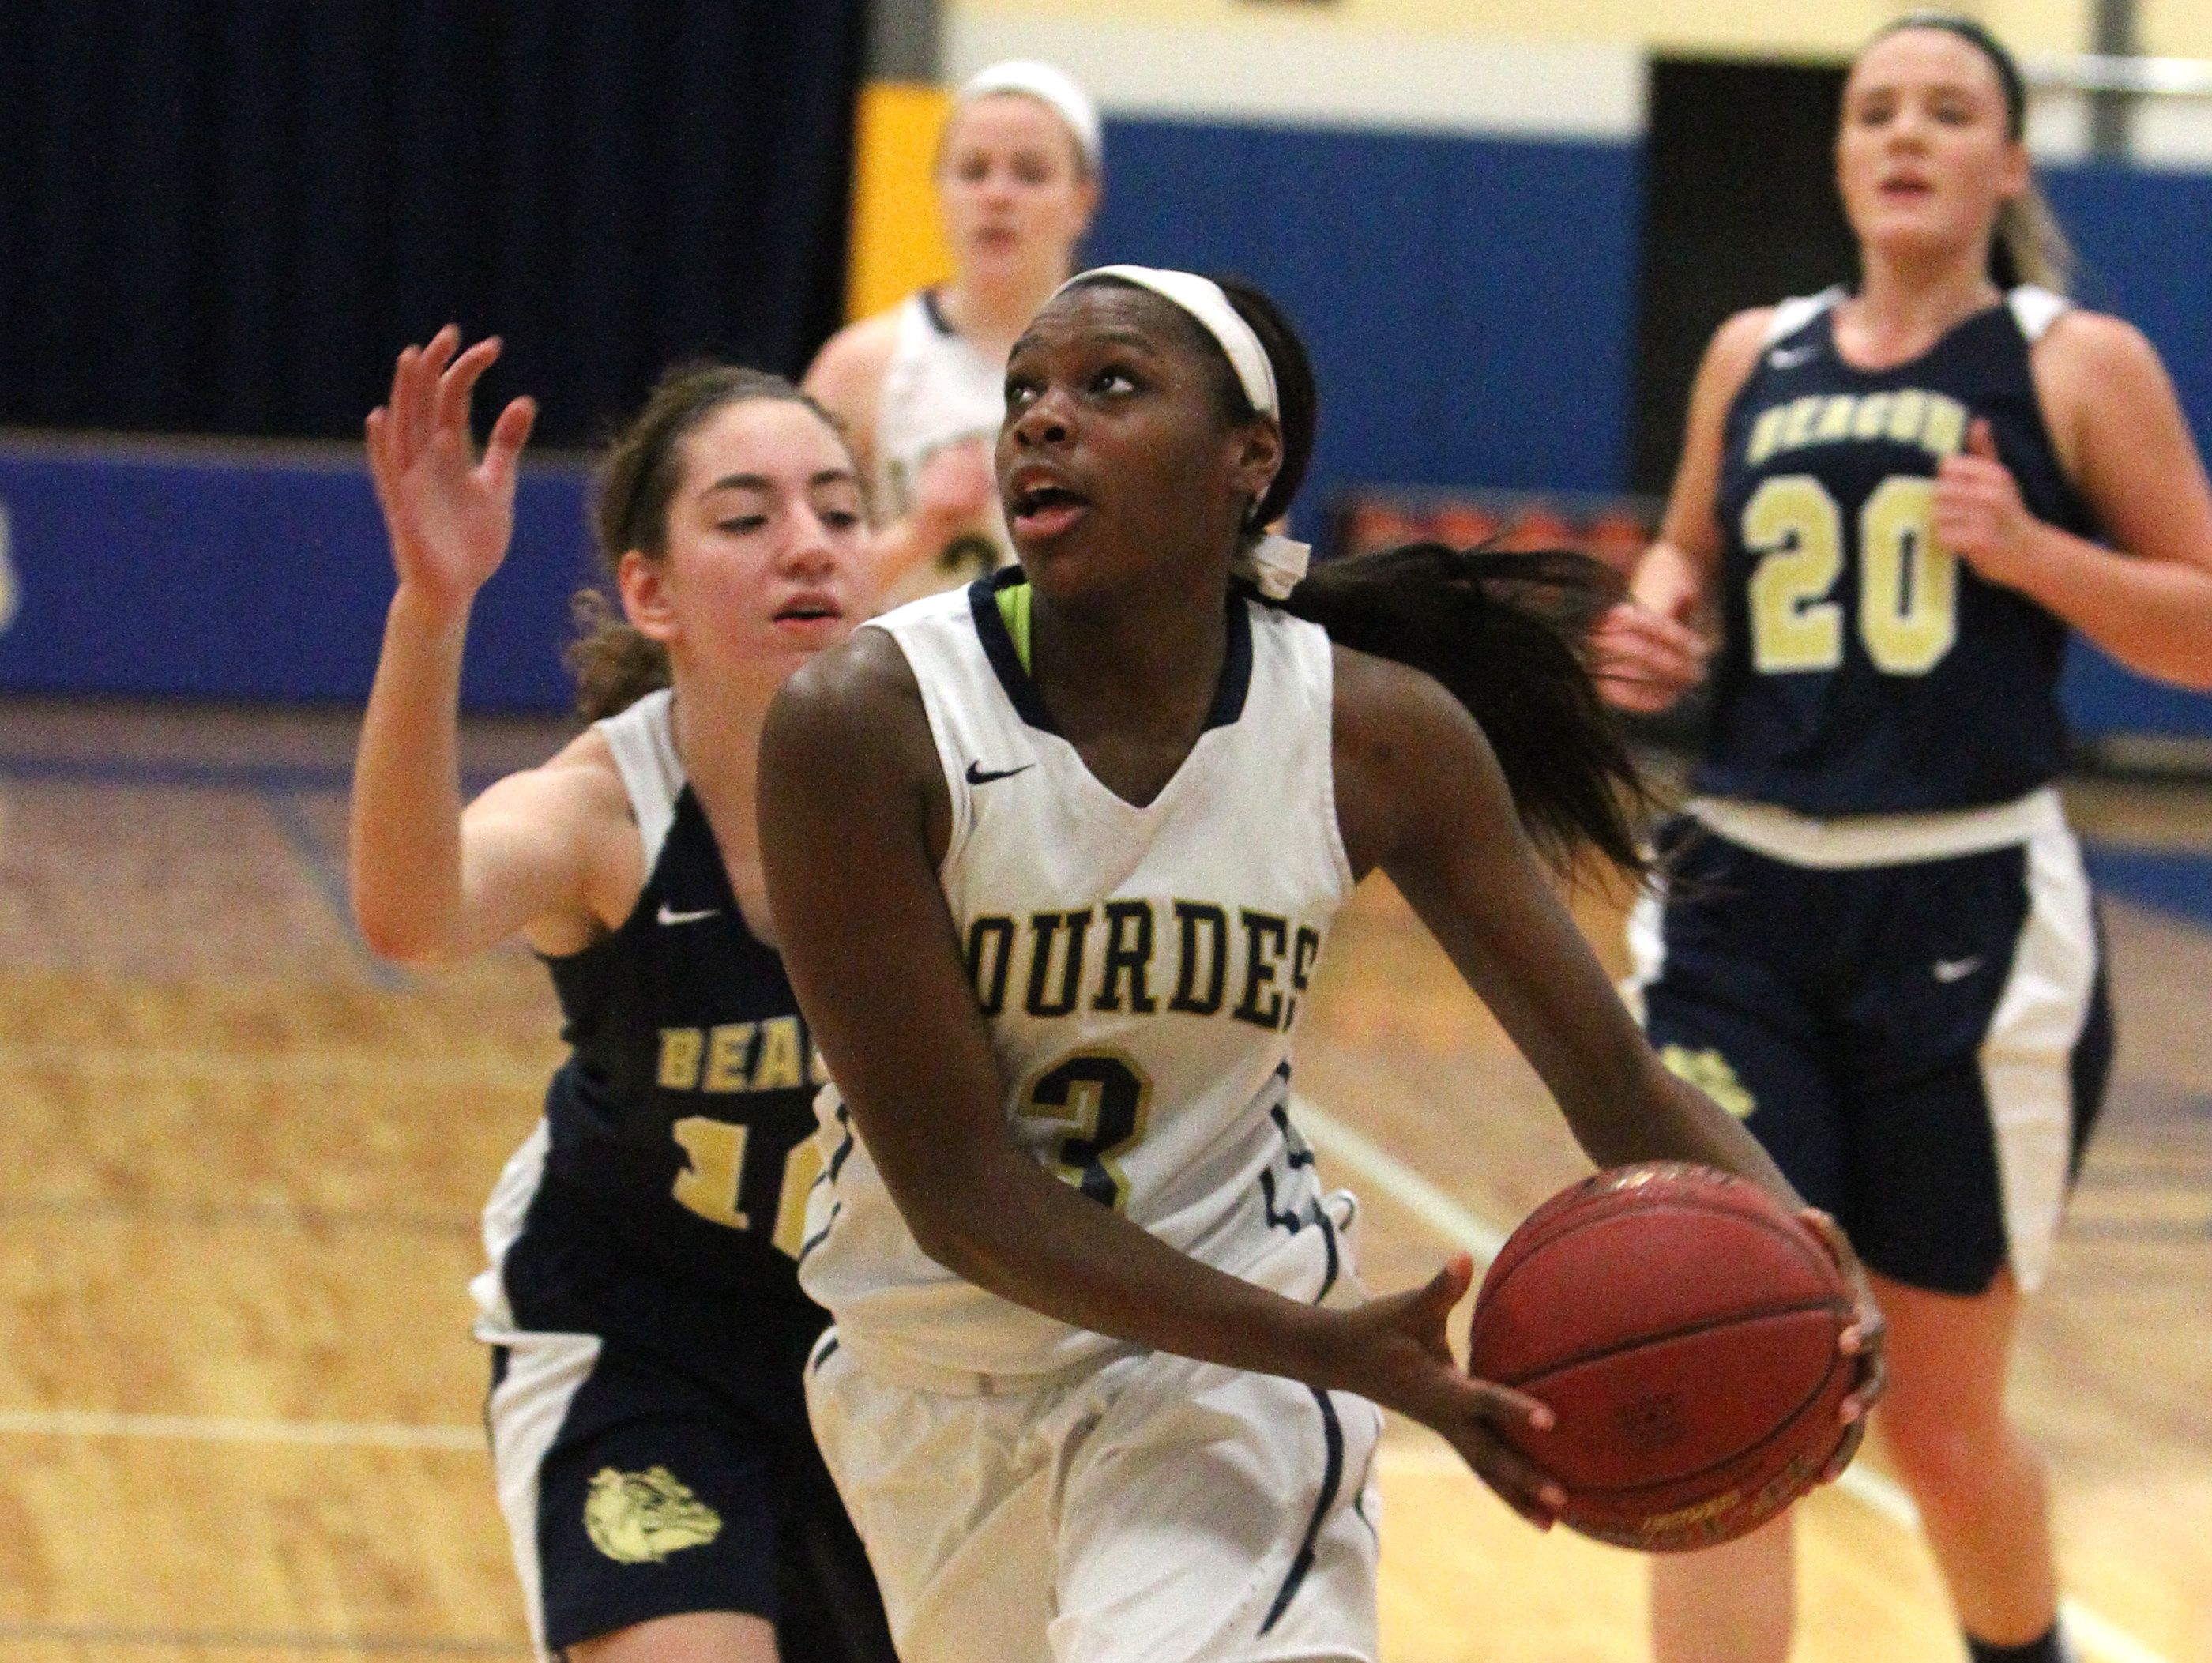 Rebecca Townes drives to the hoop in Lourdes' 86-31 win over Beacon on Tuesday.